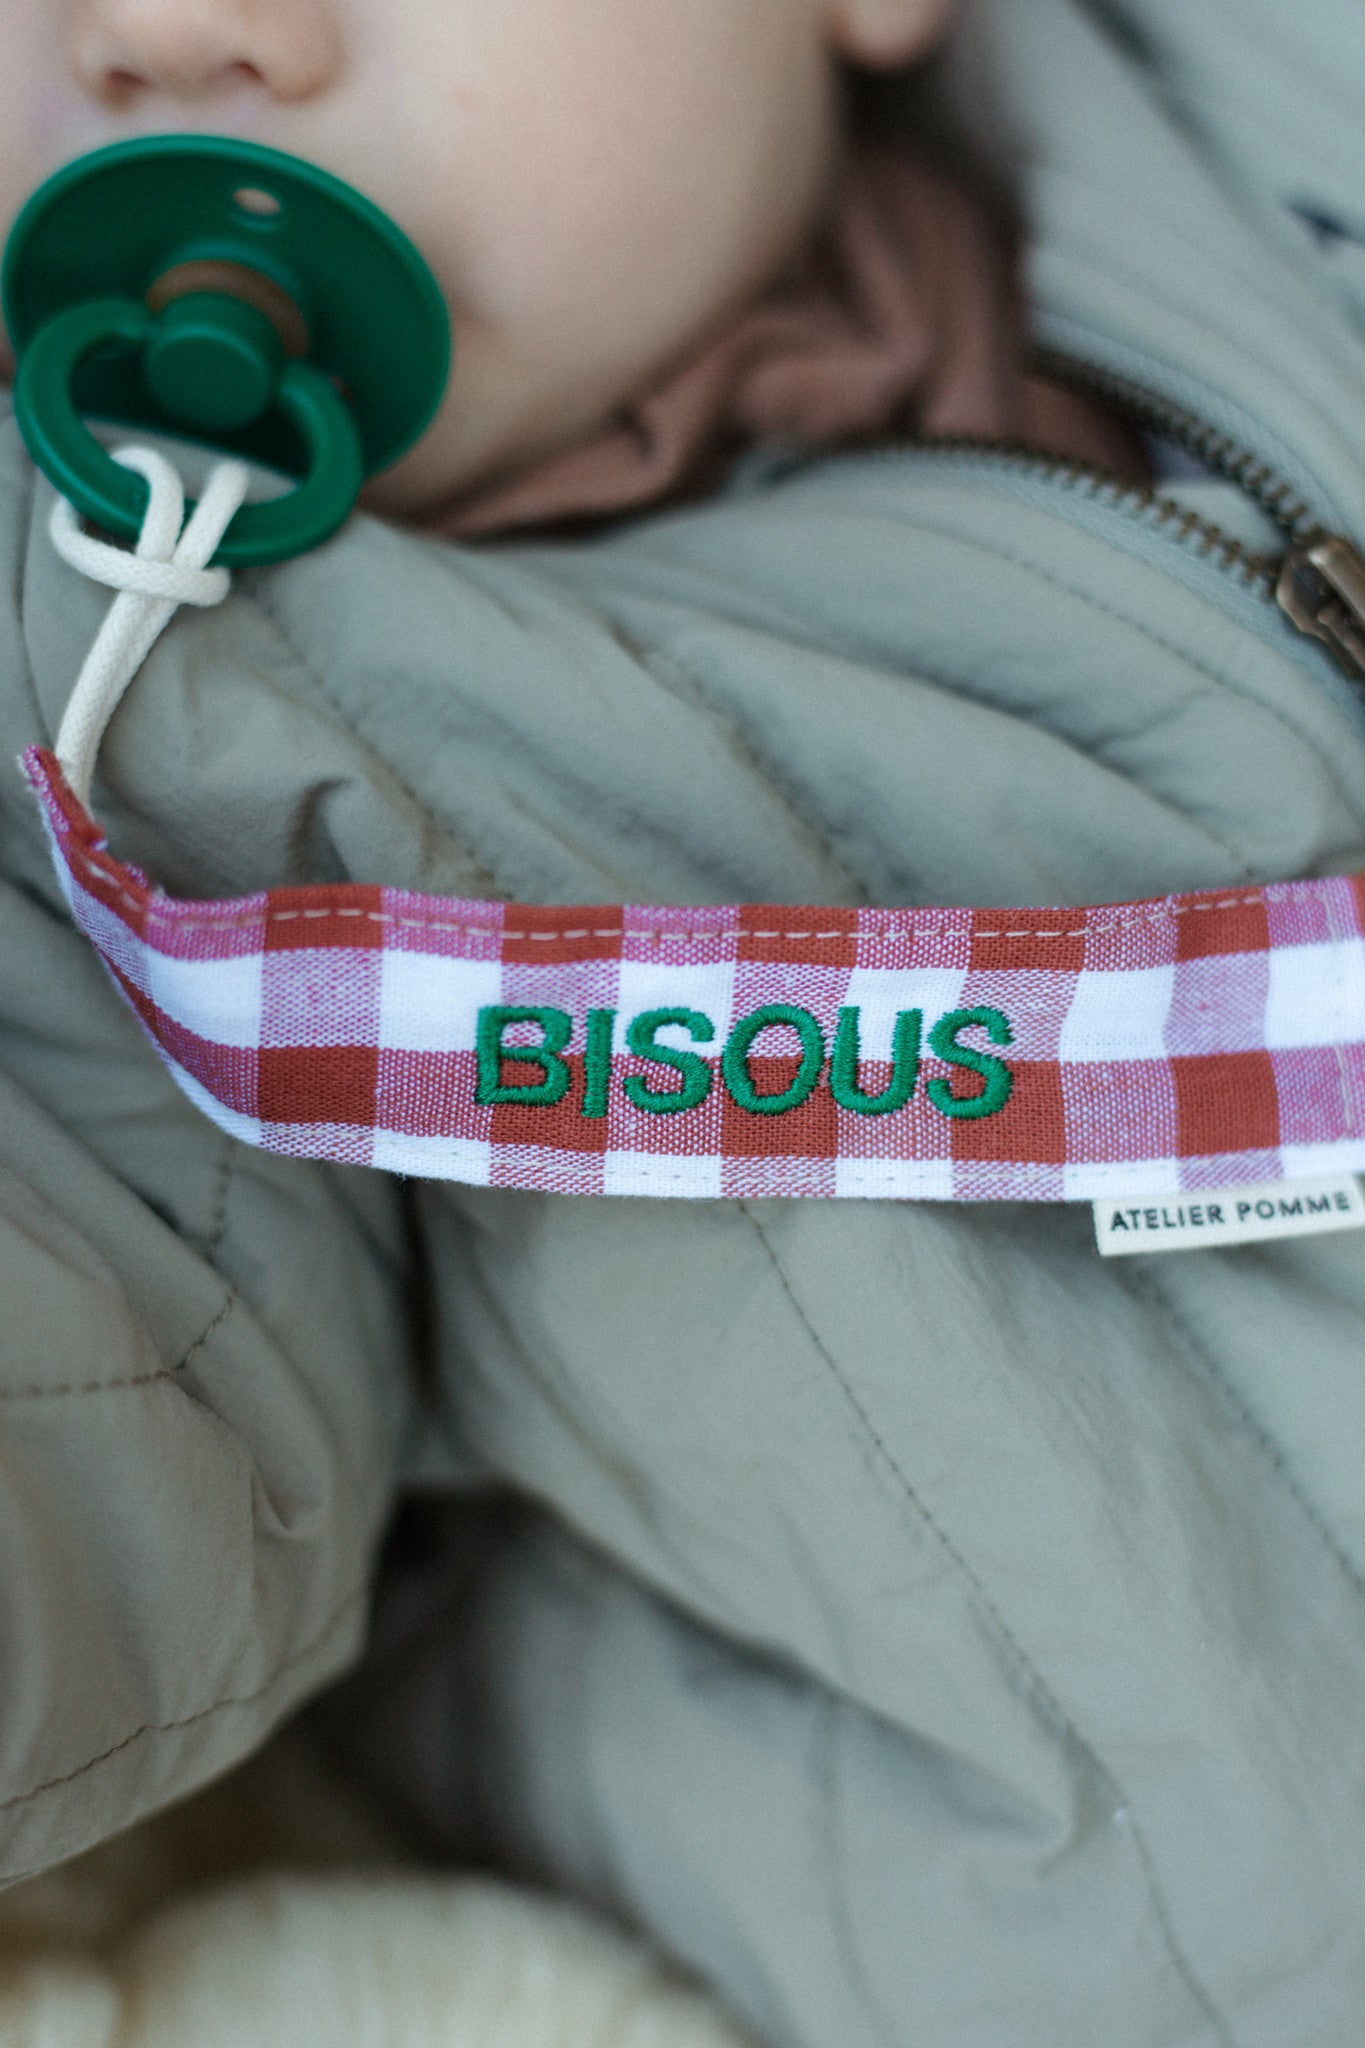 KEEP-IT-CLOSE - STICKY BIBS CHECKED IN - BISOUS BRIQUE